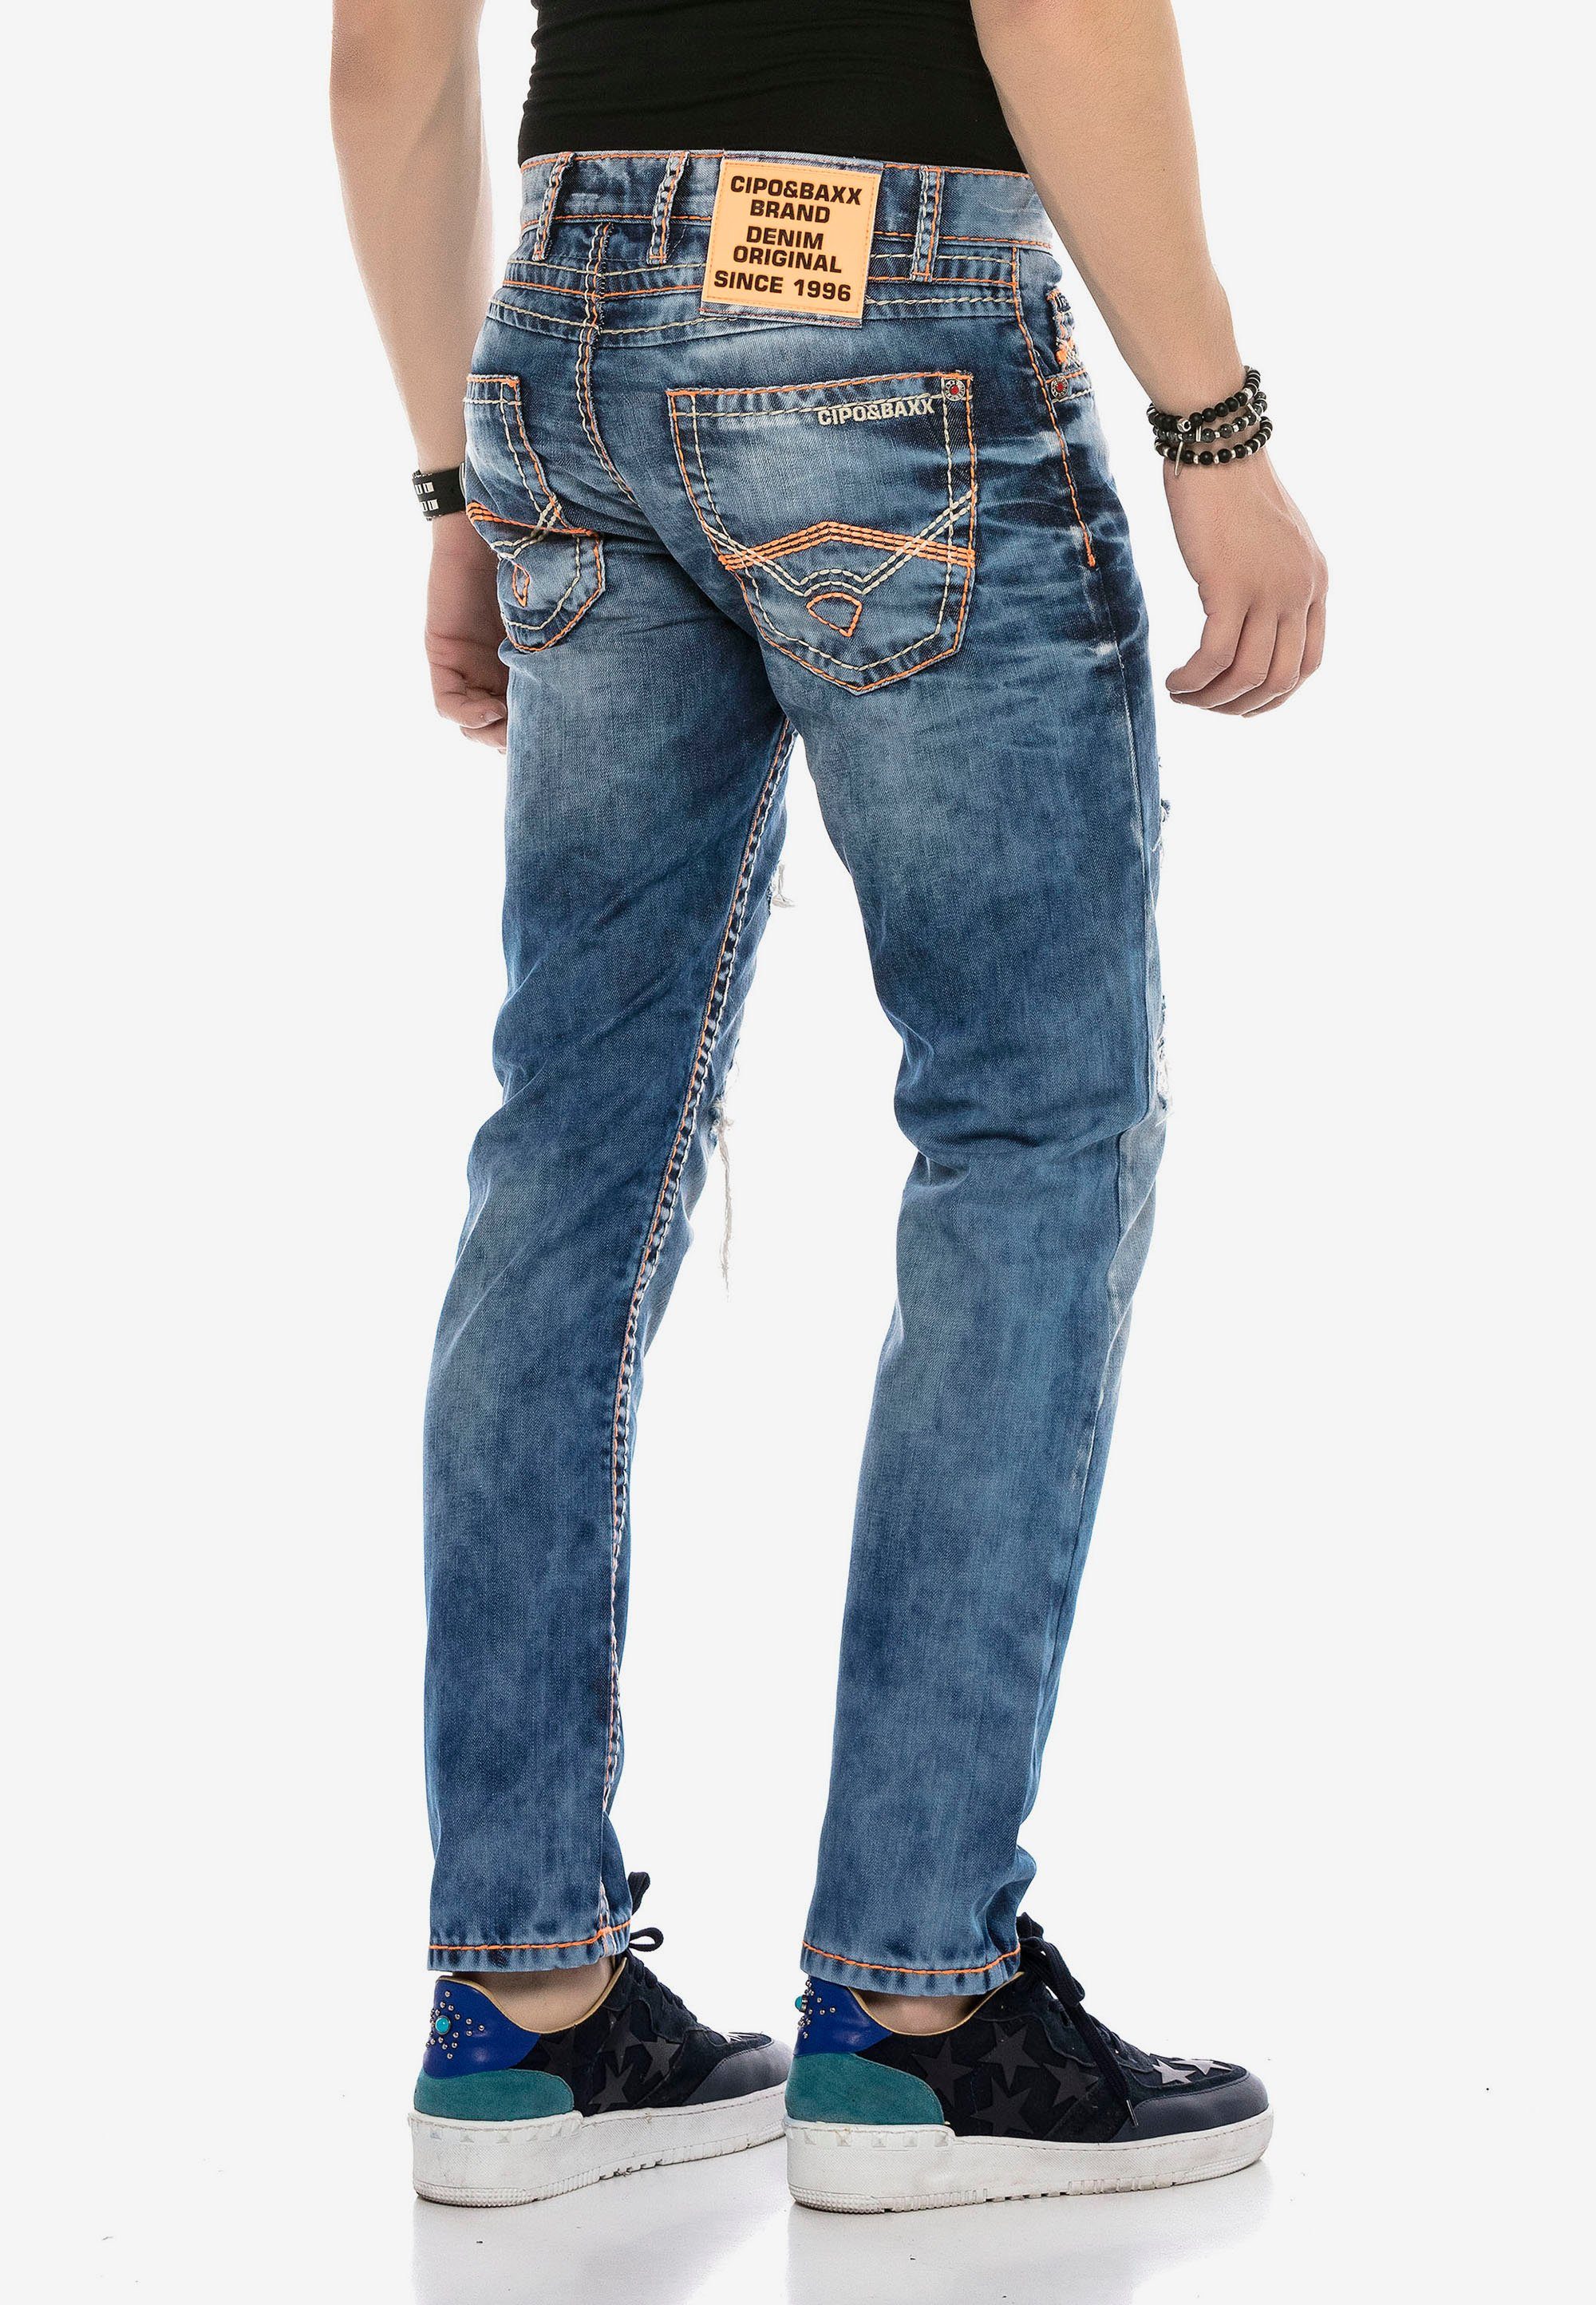 & Cipo im Destroyed-Look Bequeme Baxx Jeans